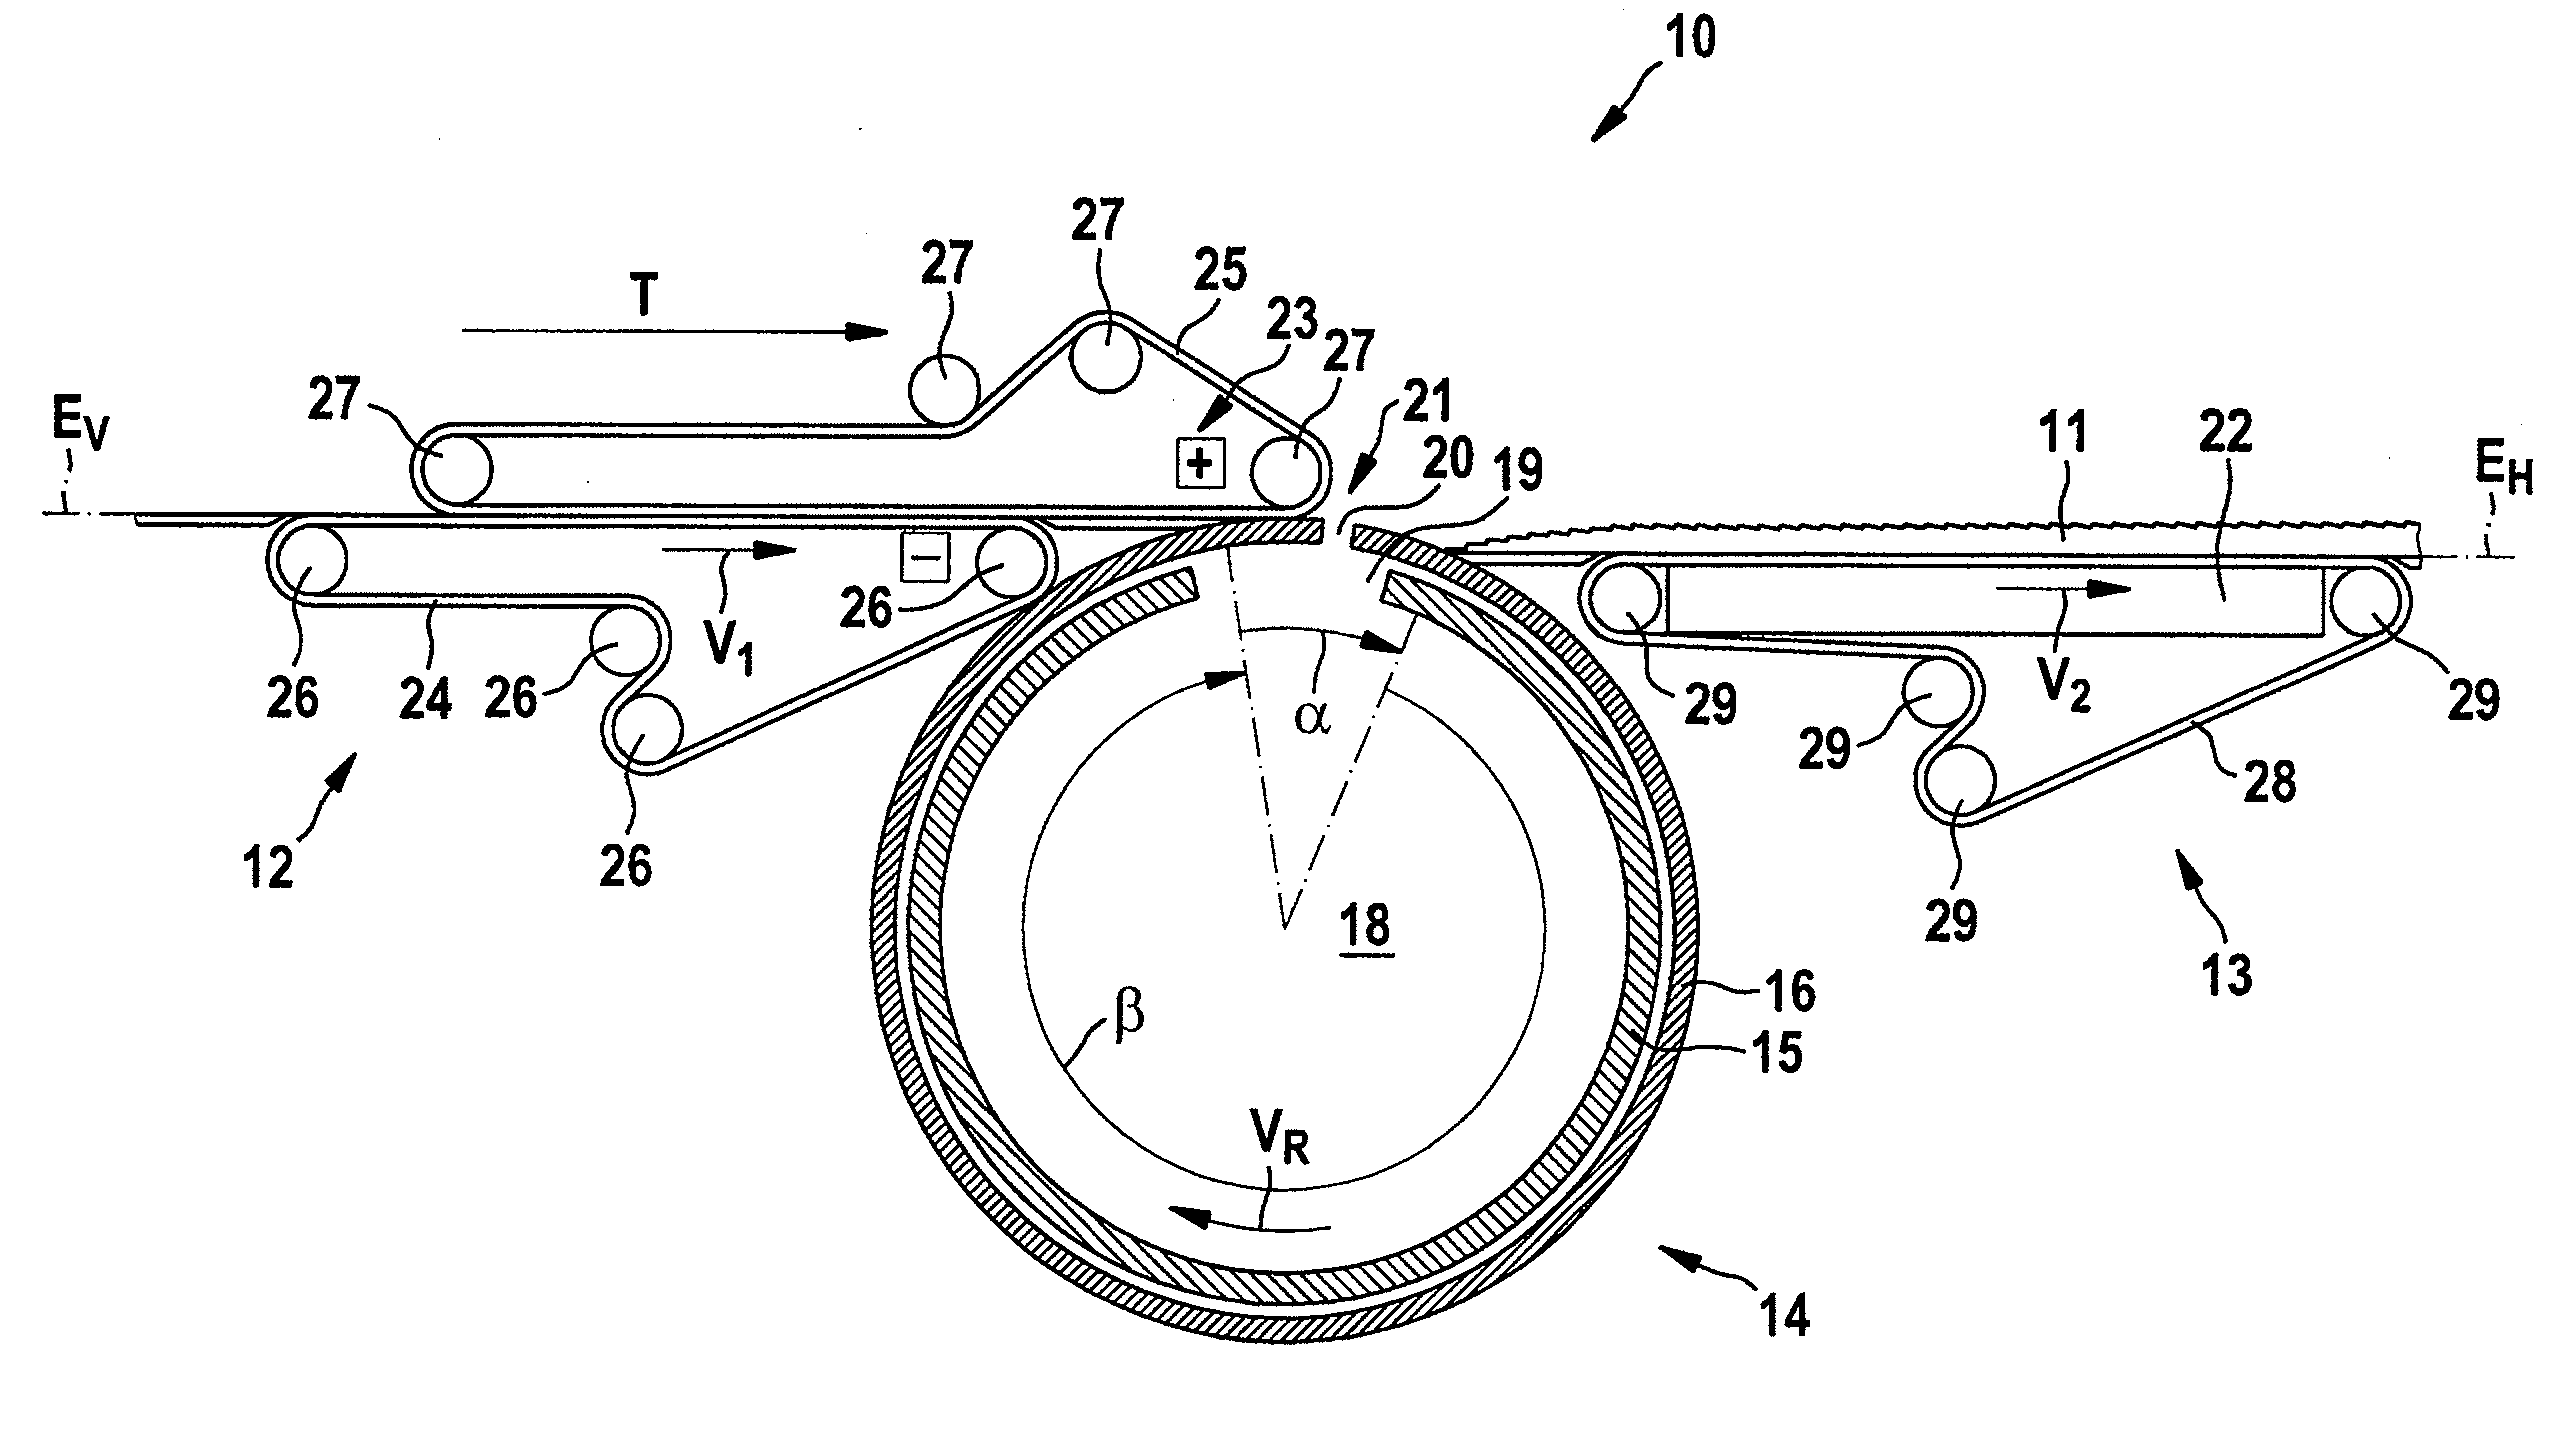 Apparatus and method for forming a stream of overlapping sheets or stacks of sheets